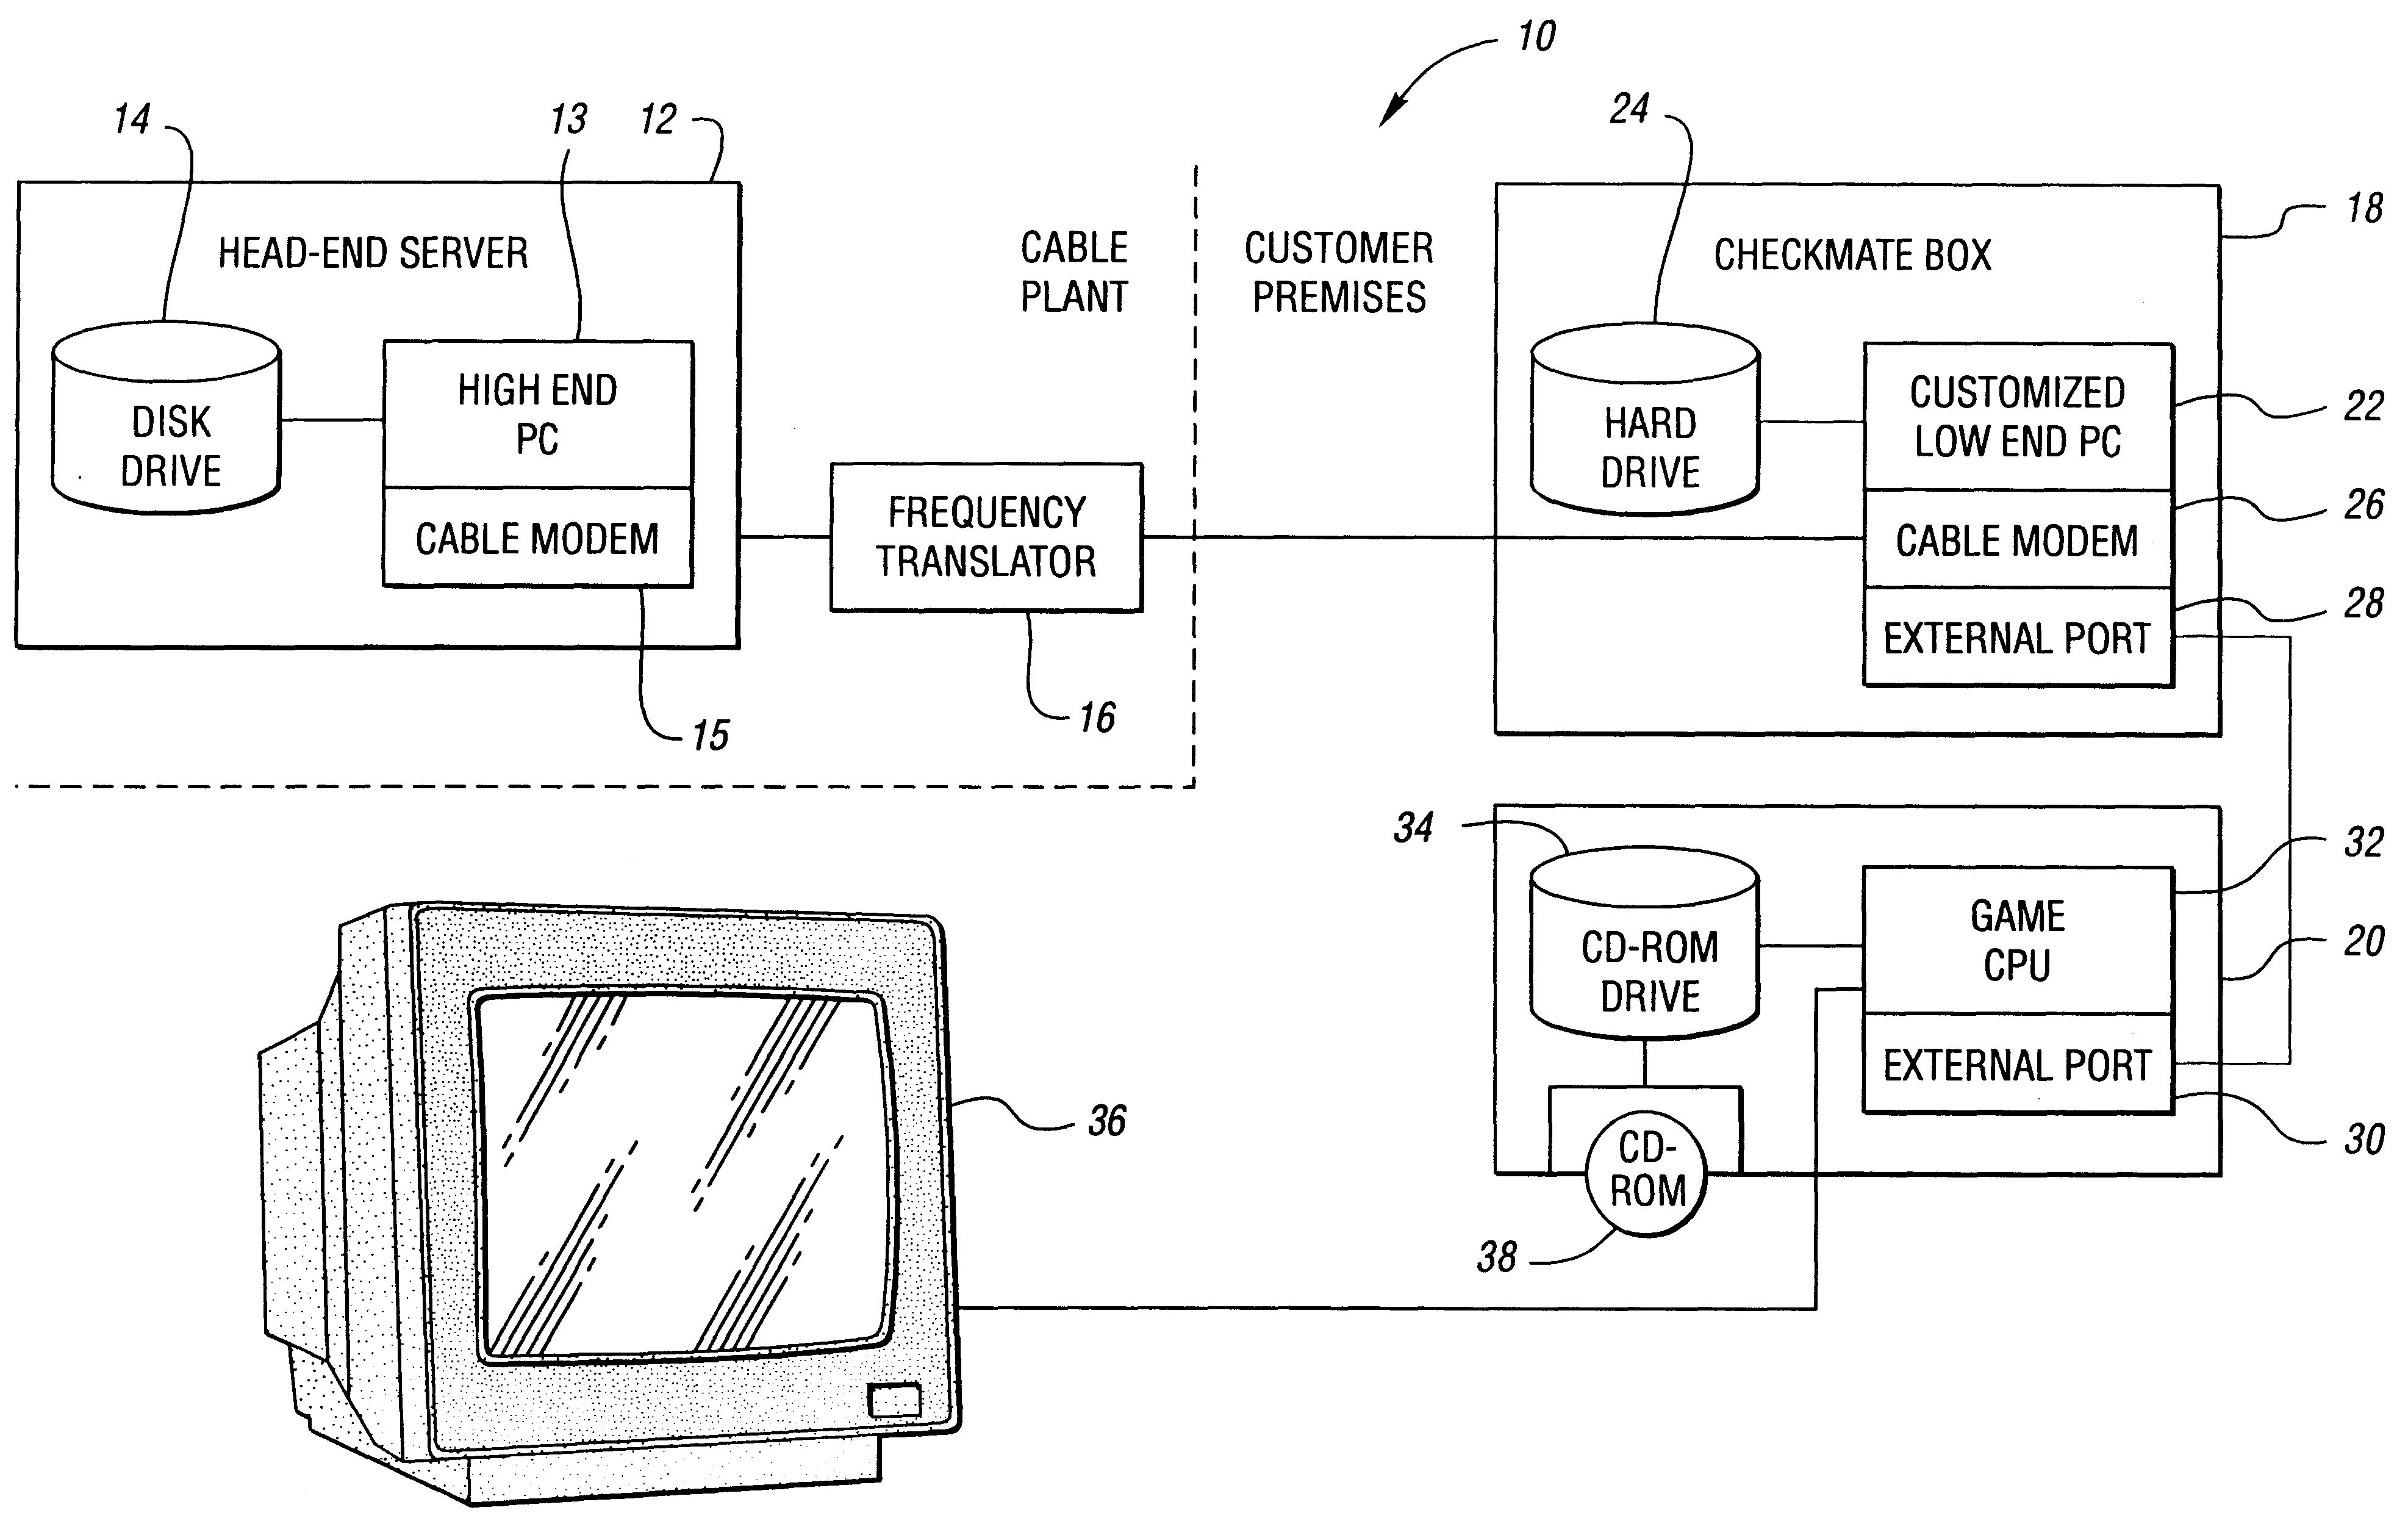 System and method for scheduled delivery of a software program over a cable network